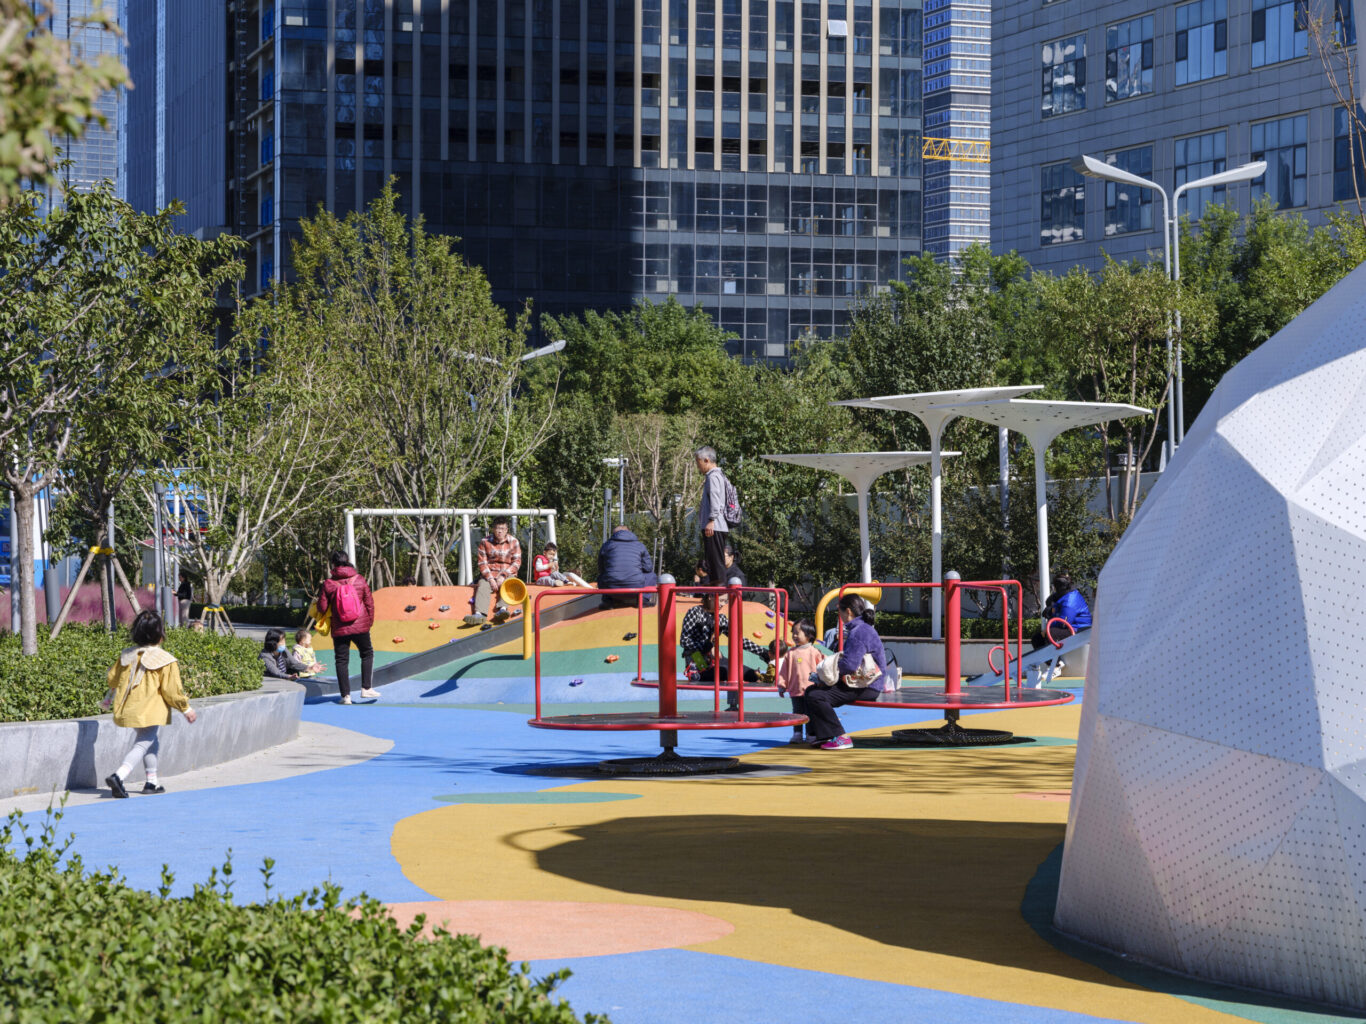 Slide 4 of 4, Children play in playground in Jinan RIbbon Park